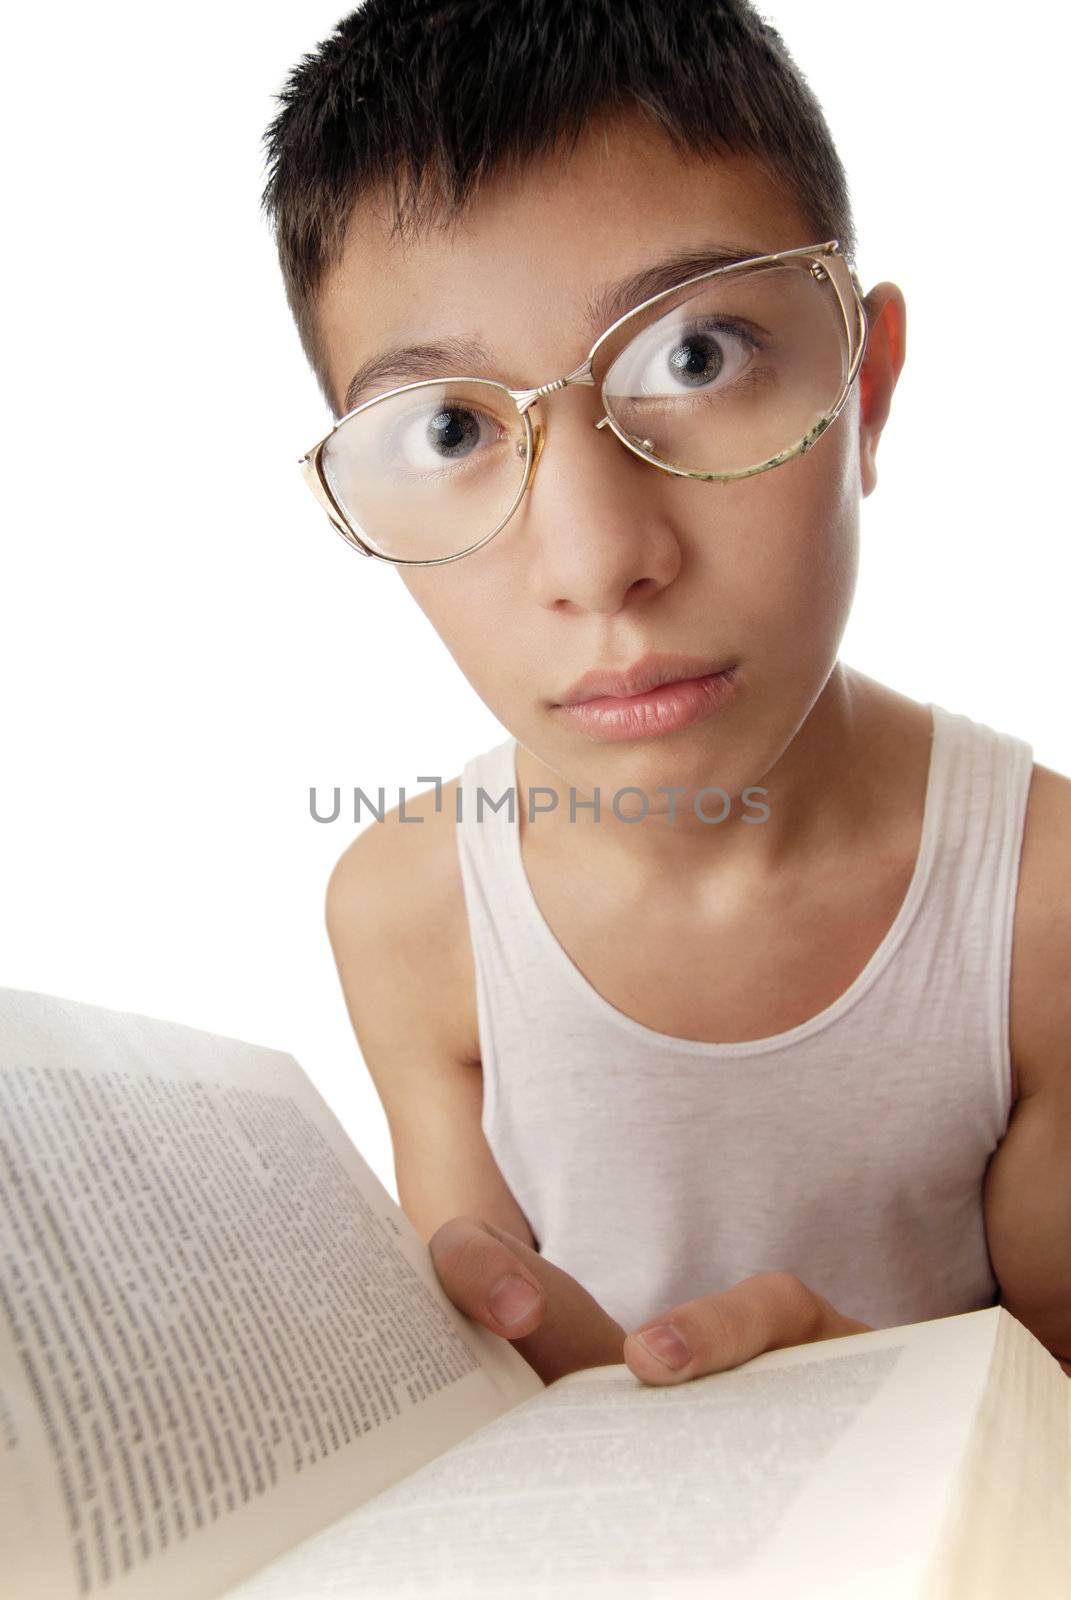 Photo of young boy with a book and spectacles as a symbol of erudition